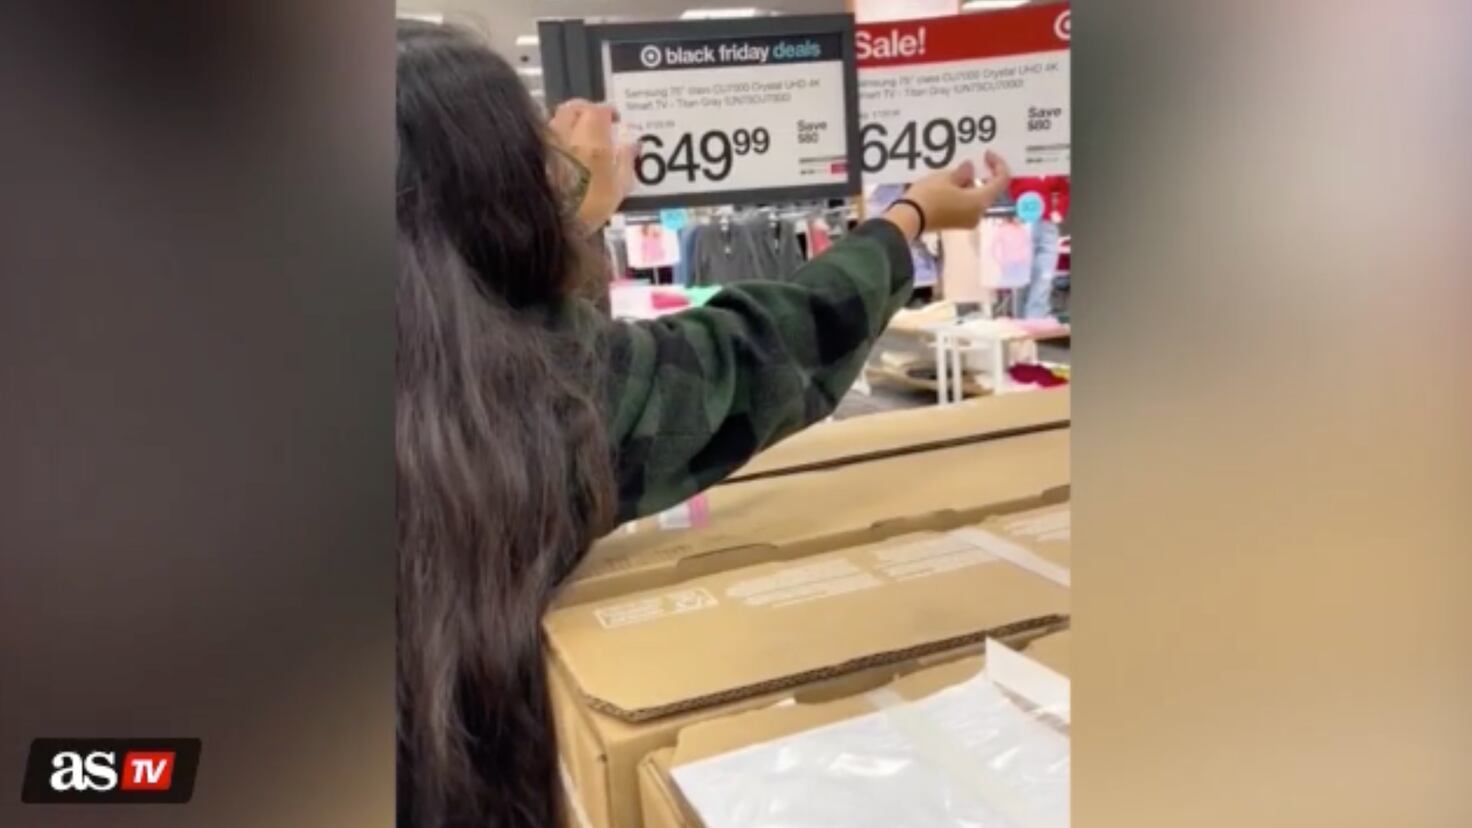 It's To Trick Us”: Shoppers Slam Target Over Alleged Fake Black Friday  Prices